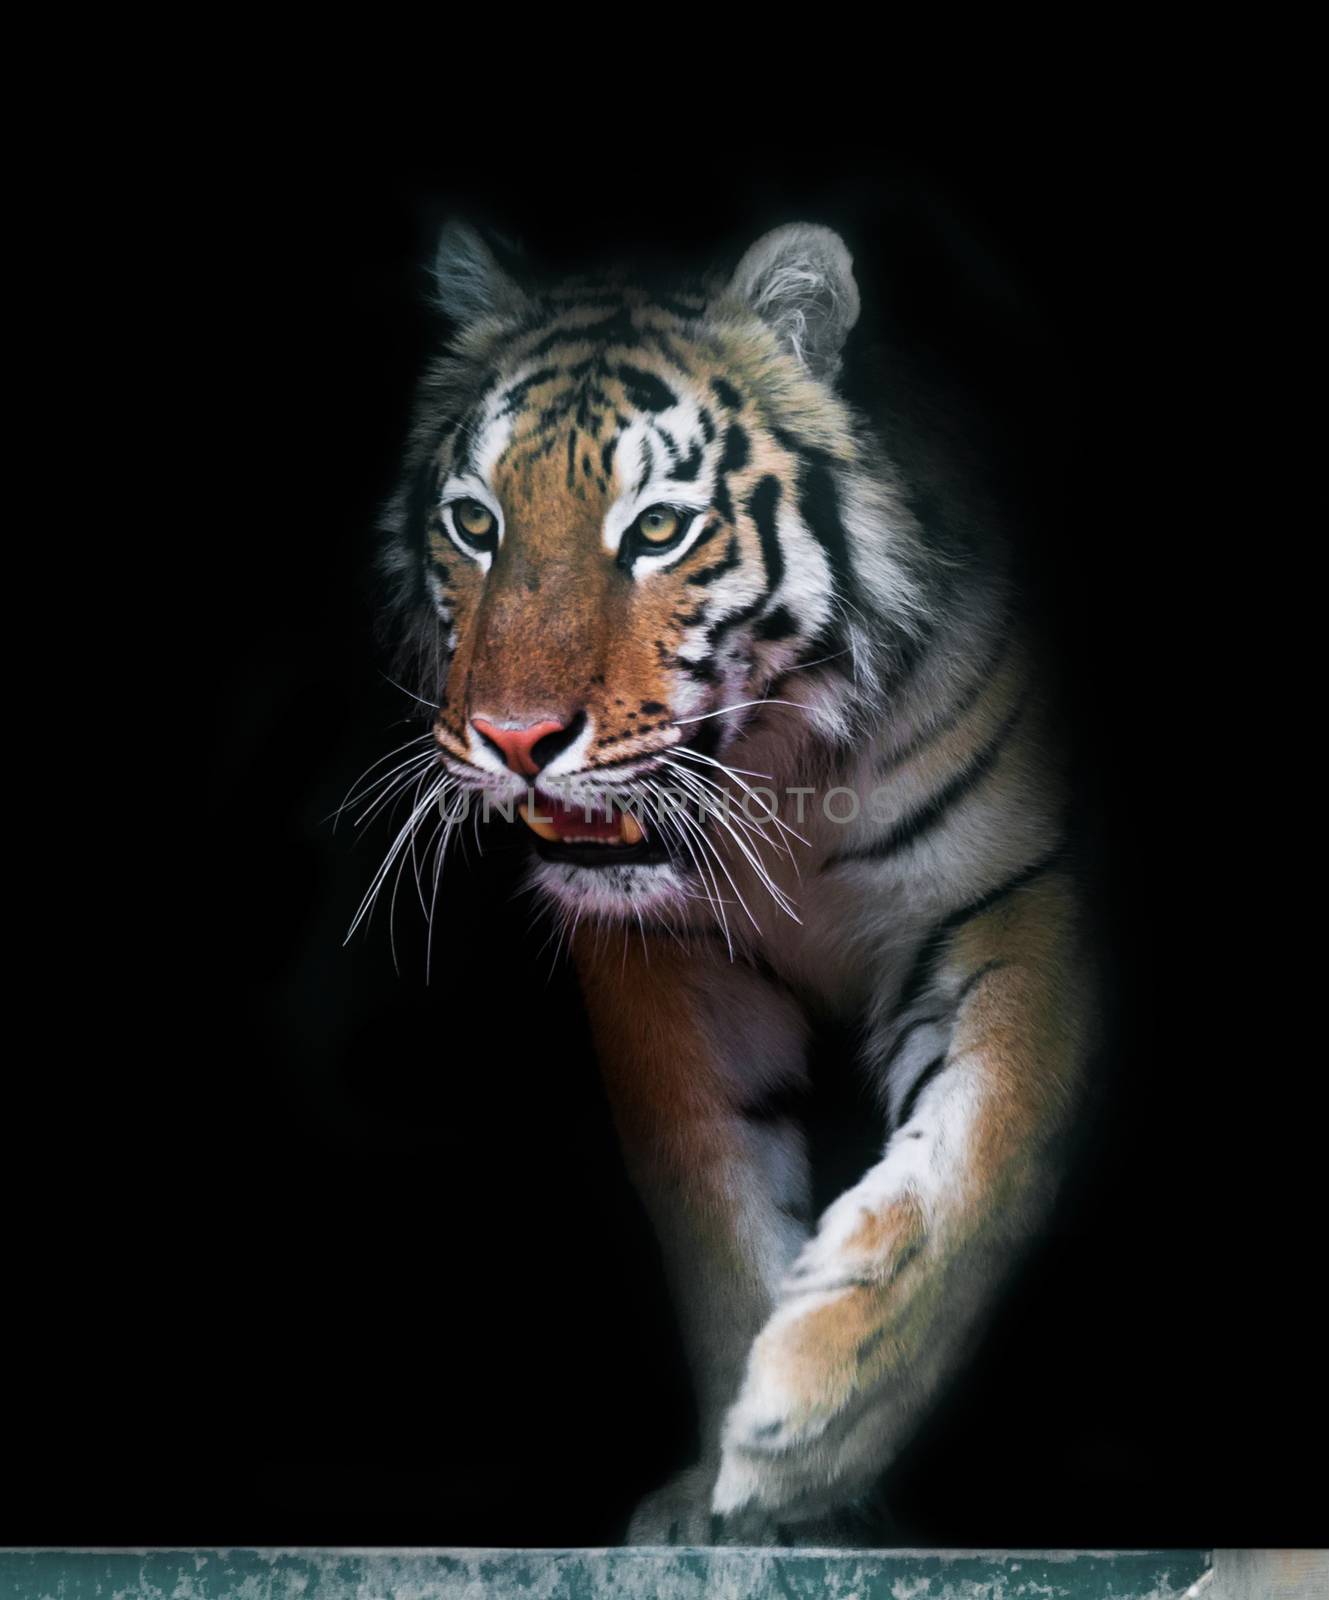 Tiger coming out, the animal background